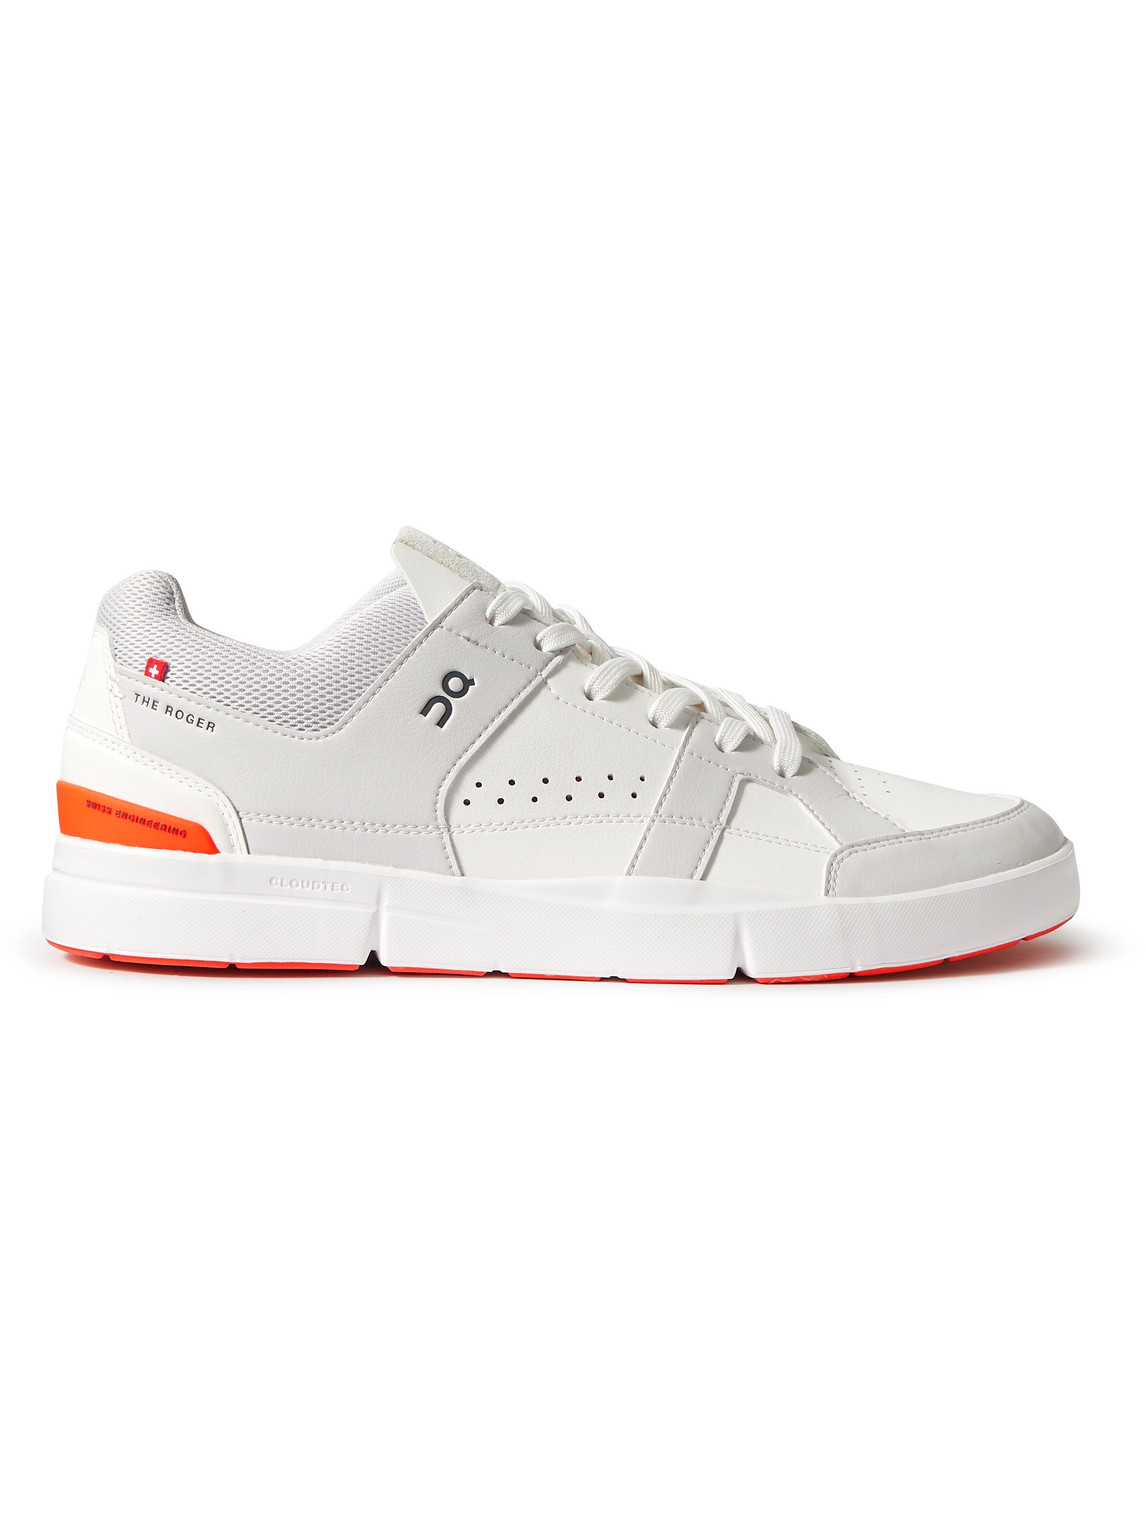 ON THE ROGER CLUBHOUSE FAUX LEATHER TENNIS SNEAKERS